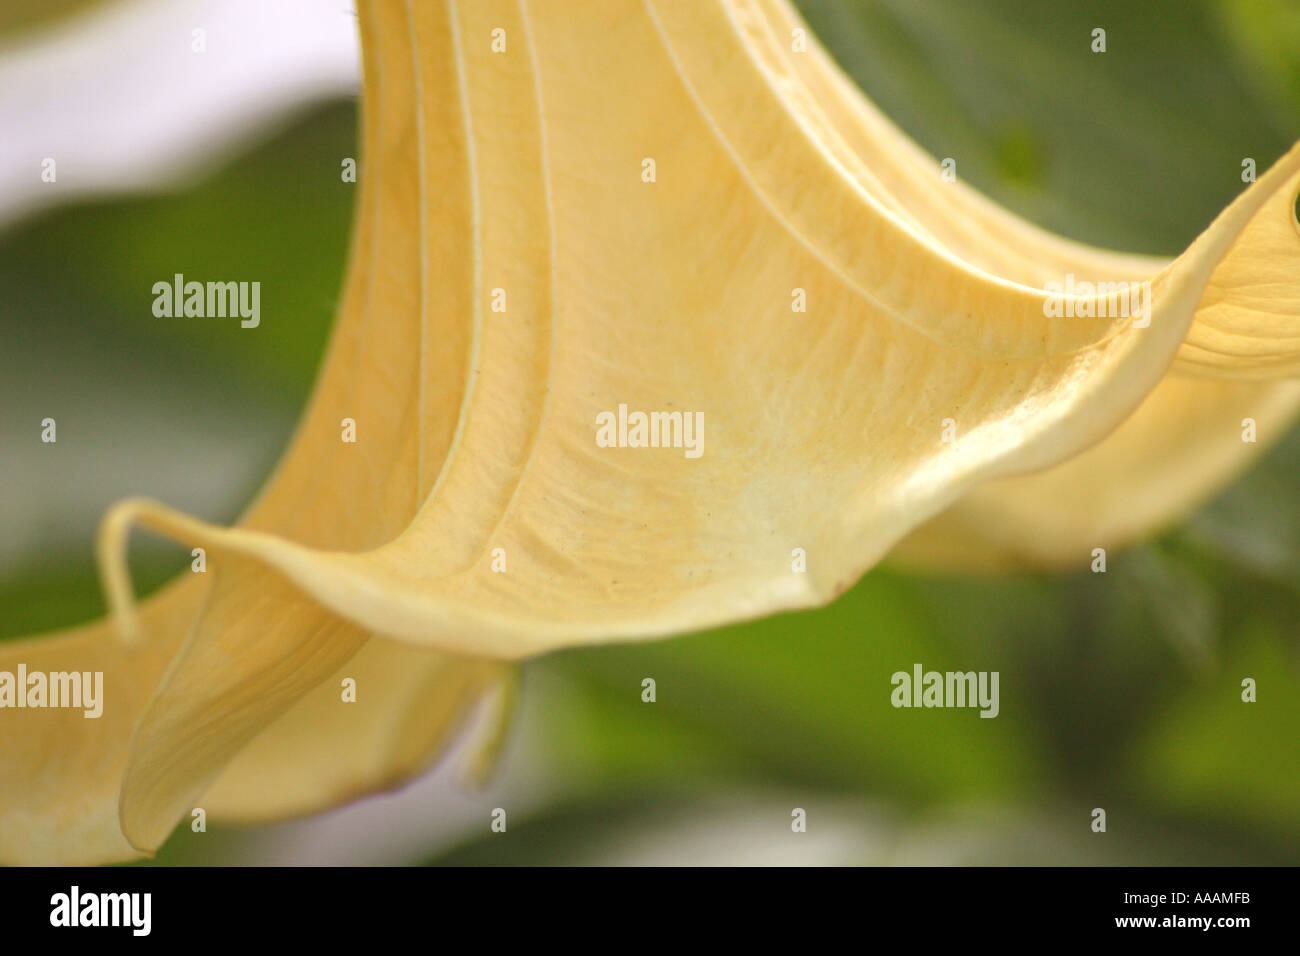 Angel's Trumpet, Brugmansia (Candida White). Brugmansia is highly toxic and is ingested during shamanic intoxication. Stock Photo